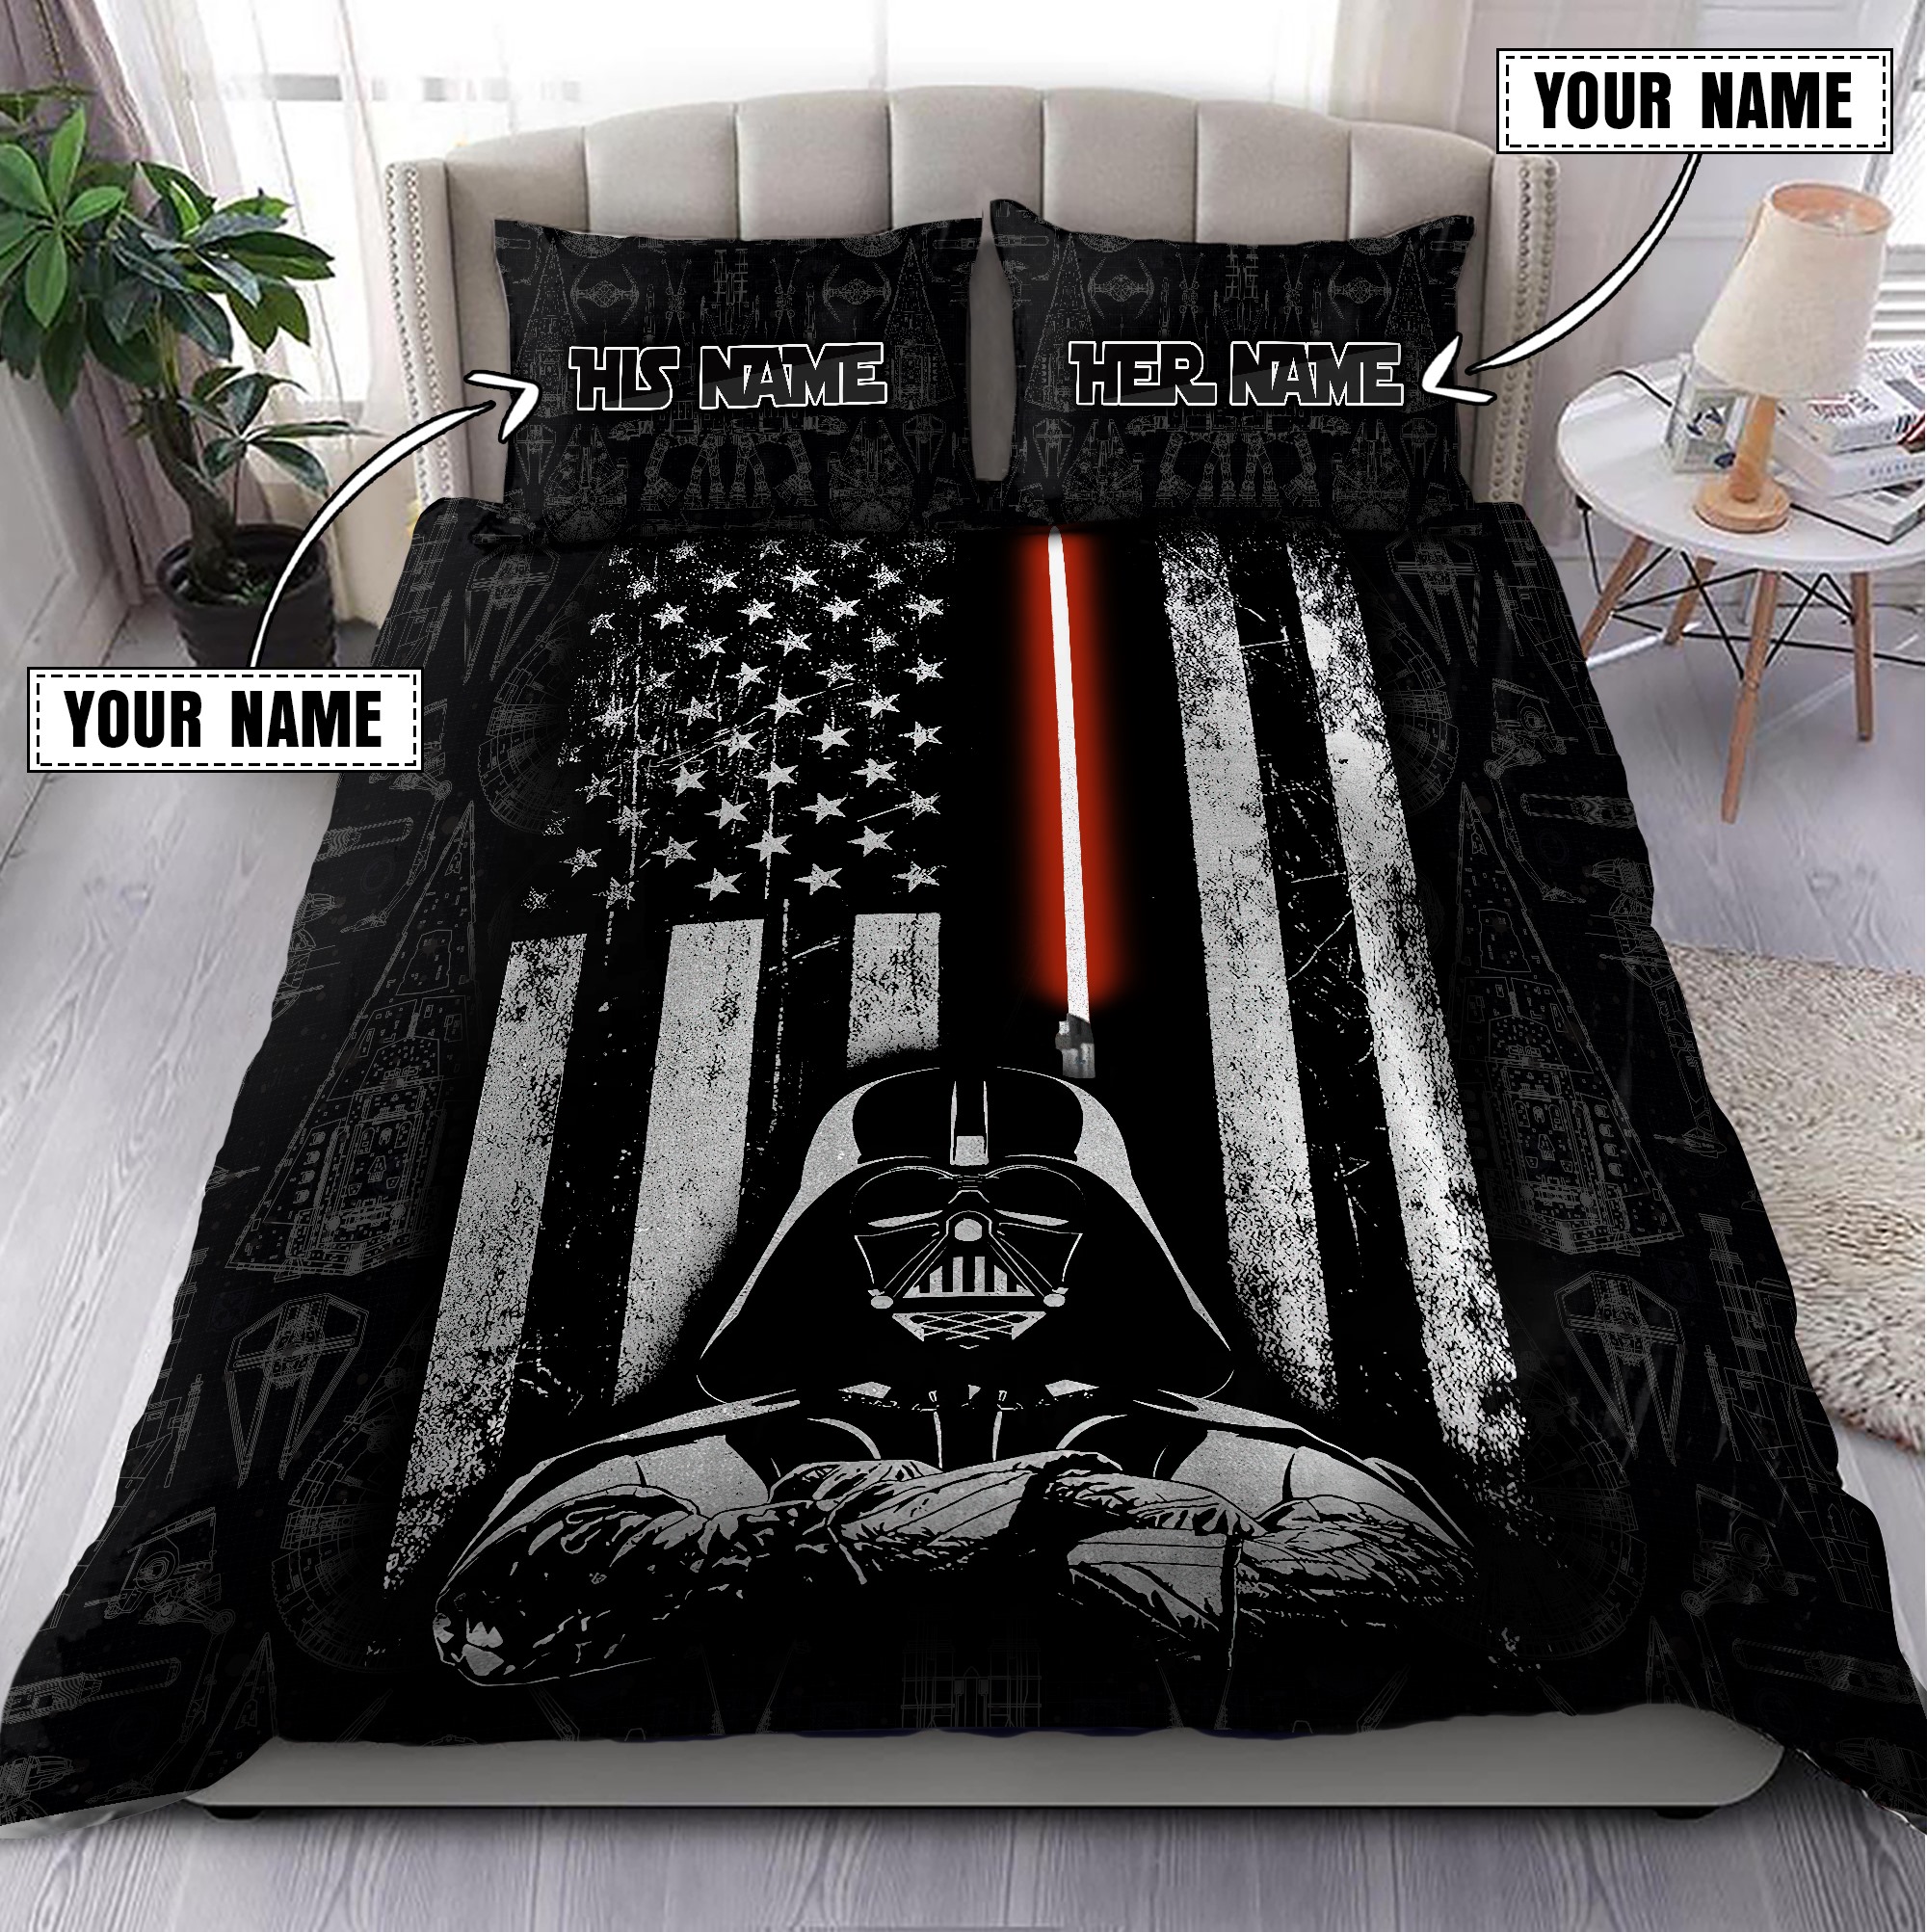 Personalized custom name star wars darth vader america flag bedding set – Teasearch3d 010721